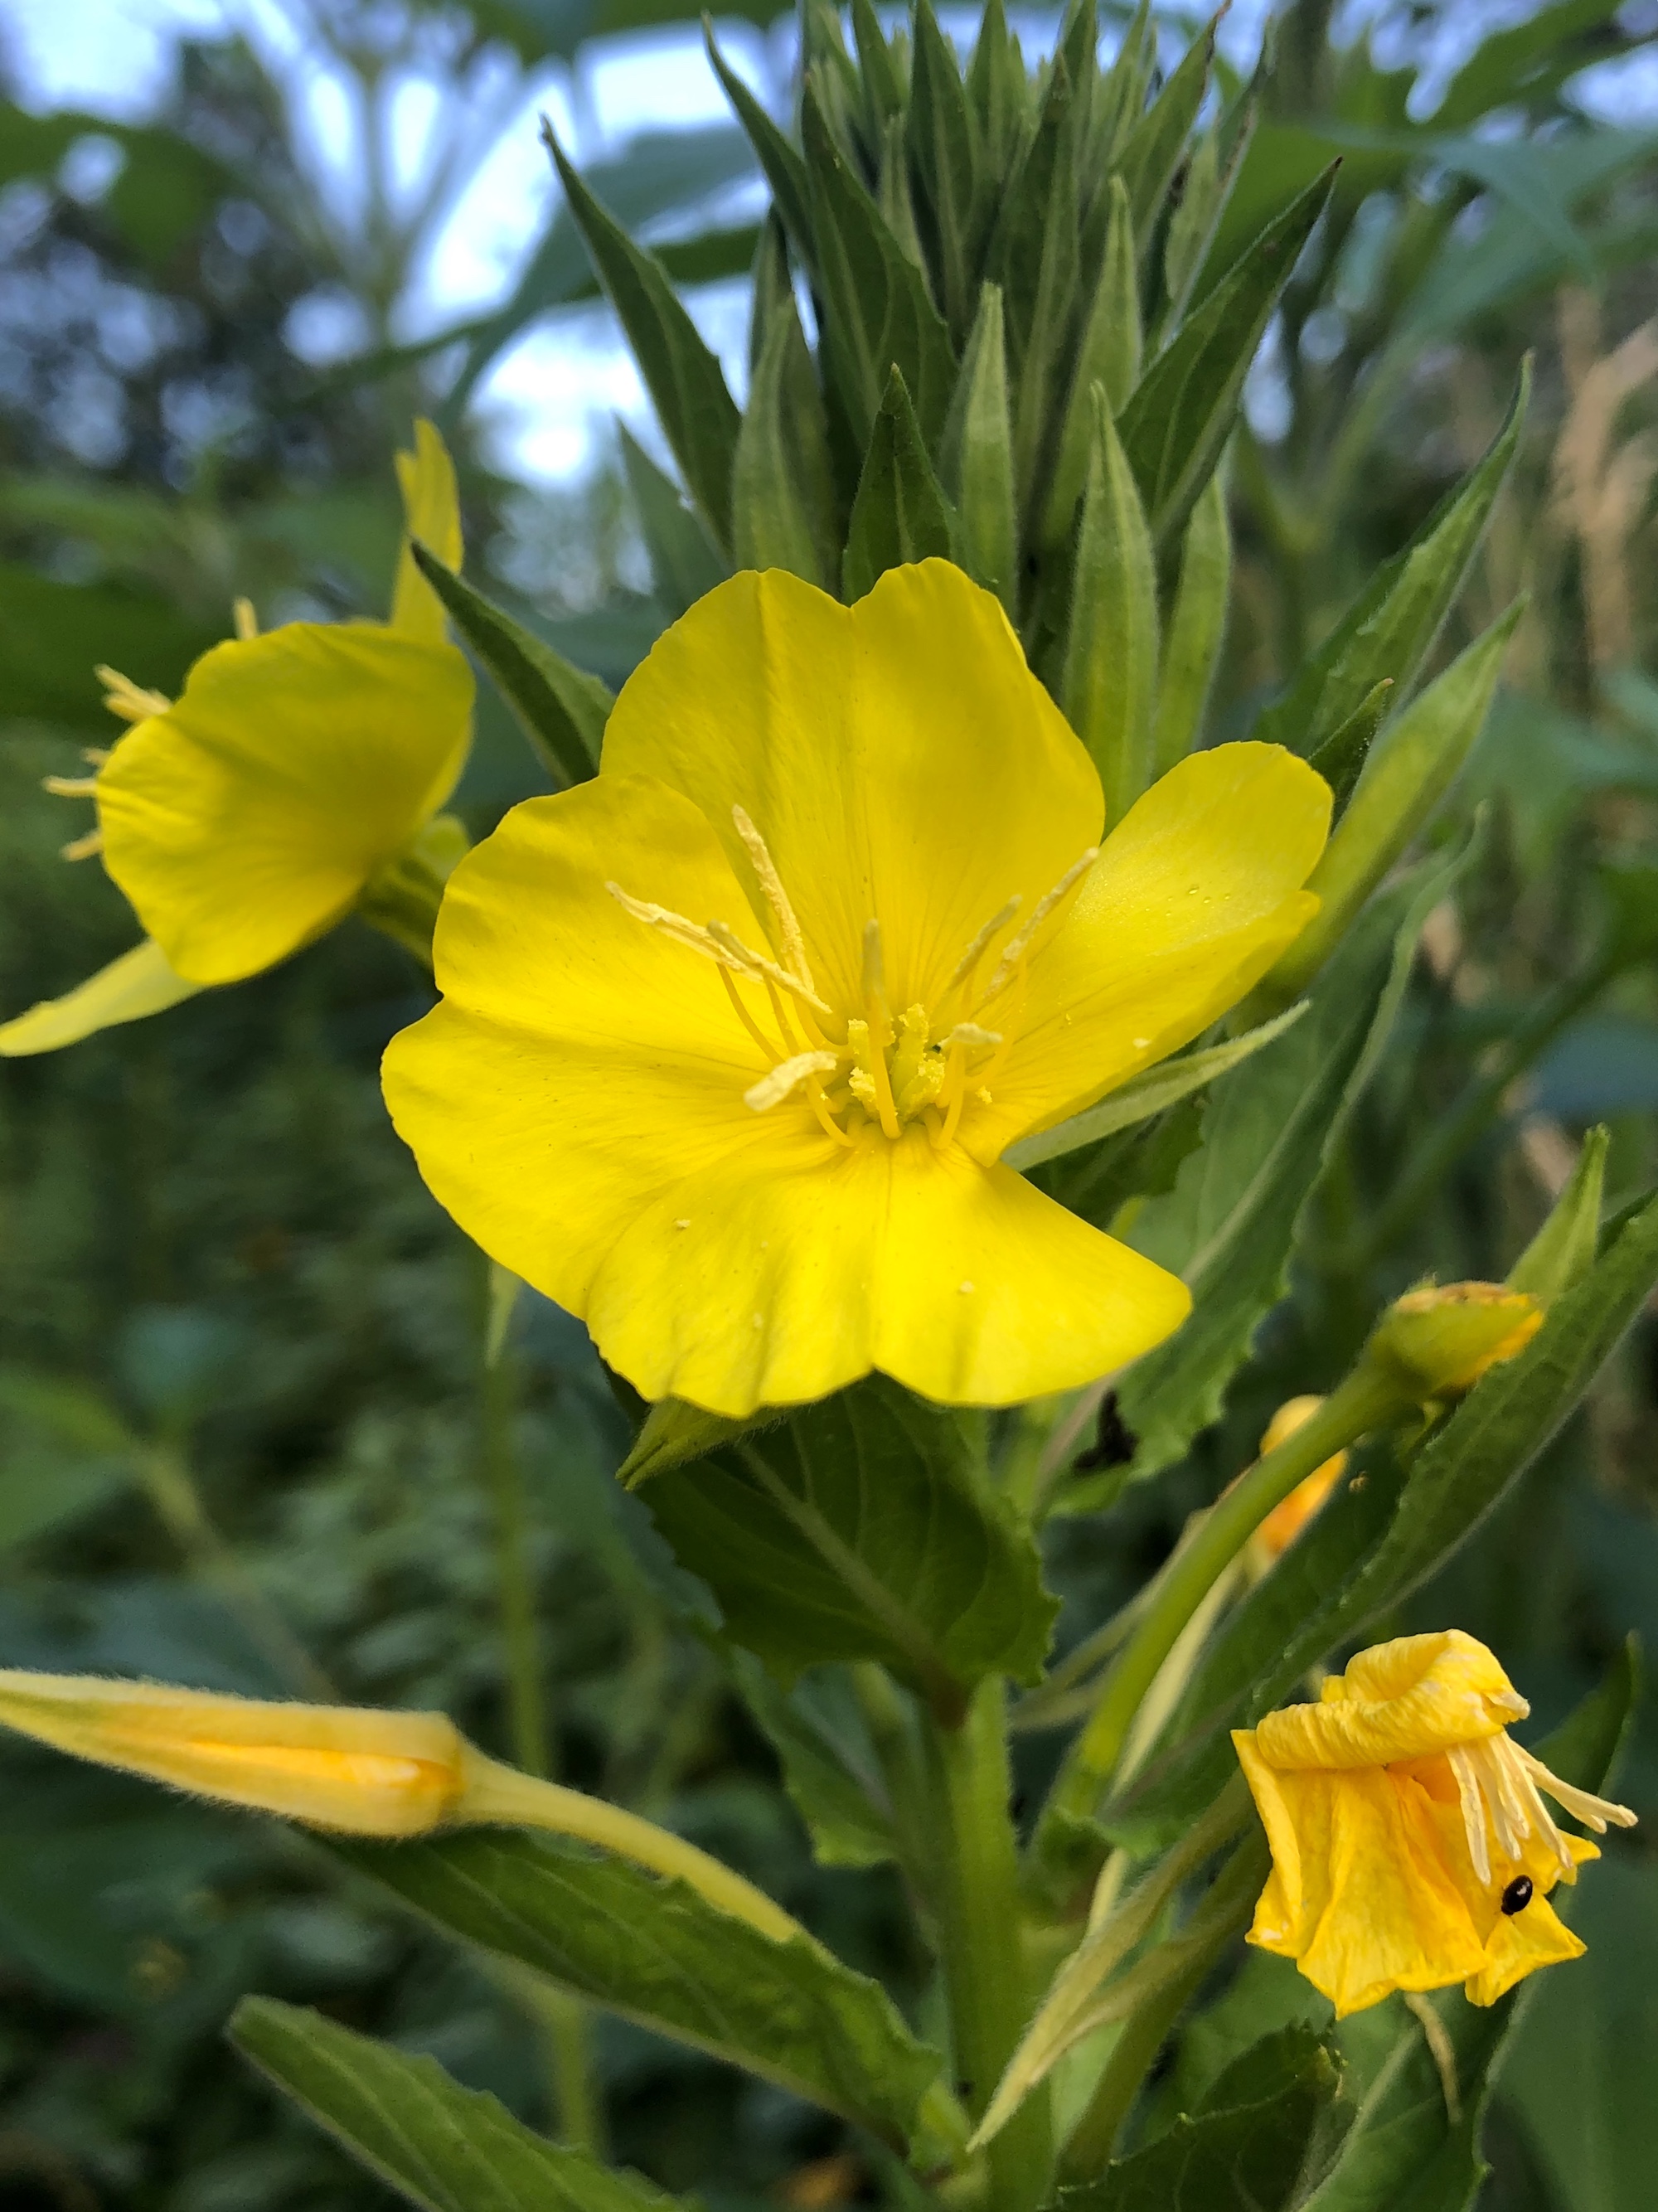 Evening Primrose in woods between Marion Dunn and the Oak Savanna on August 3, 2019.